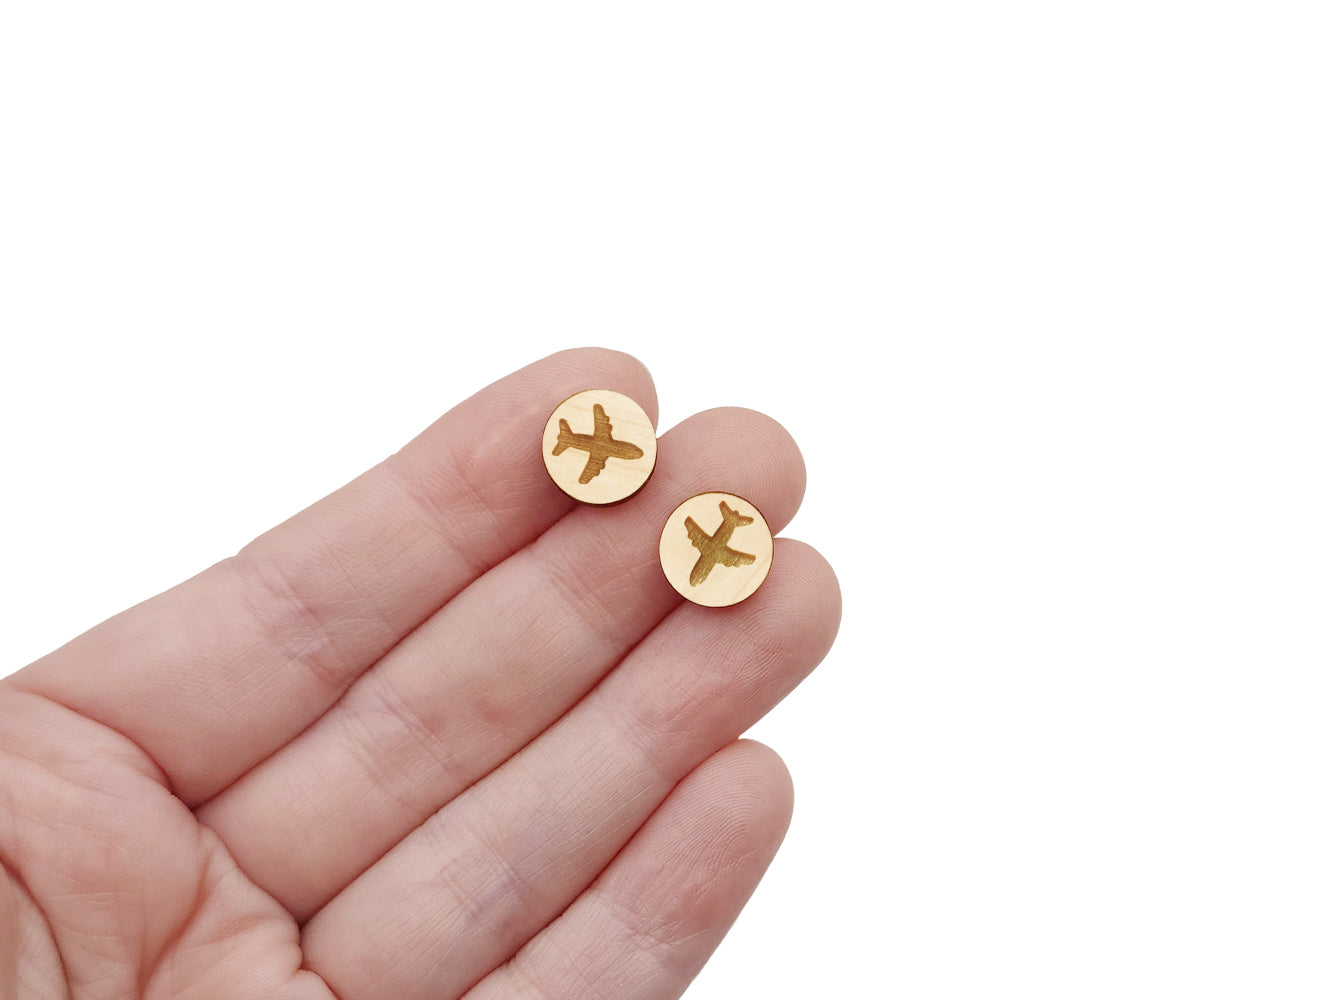 a hand holding a pair of round wooden cabochon earring blanks engraved with a airplane silhouette